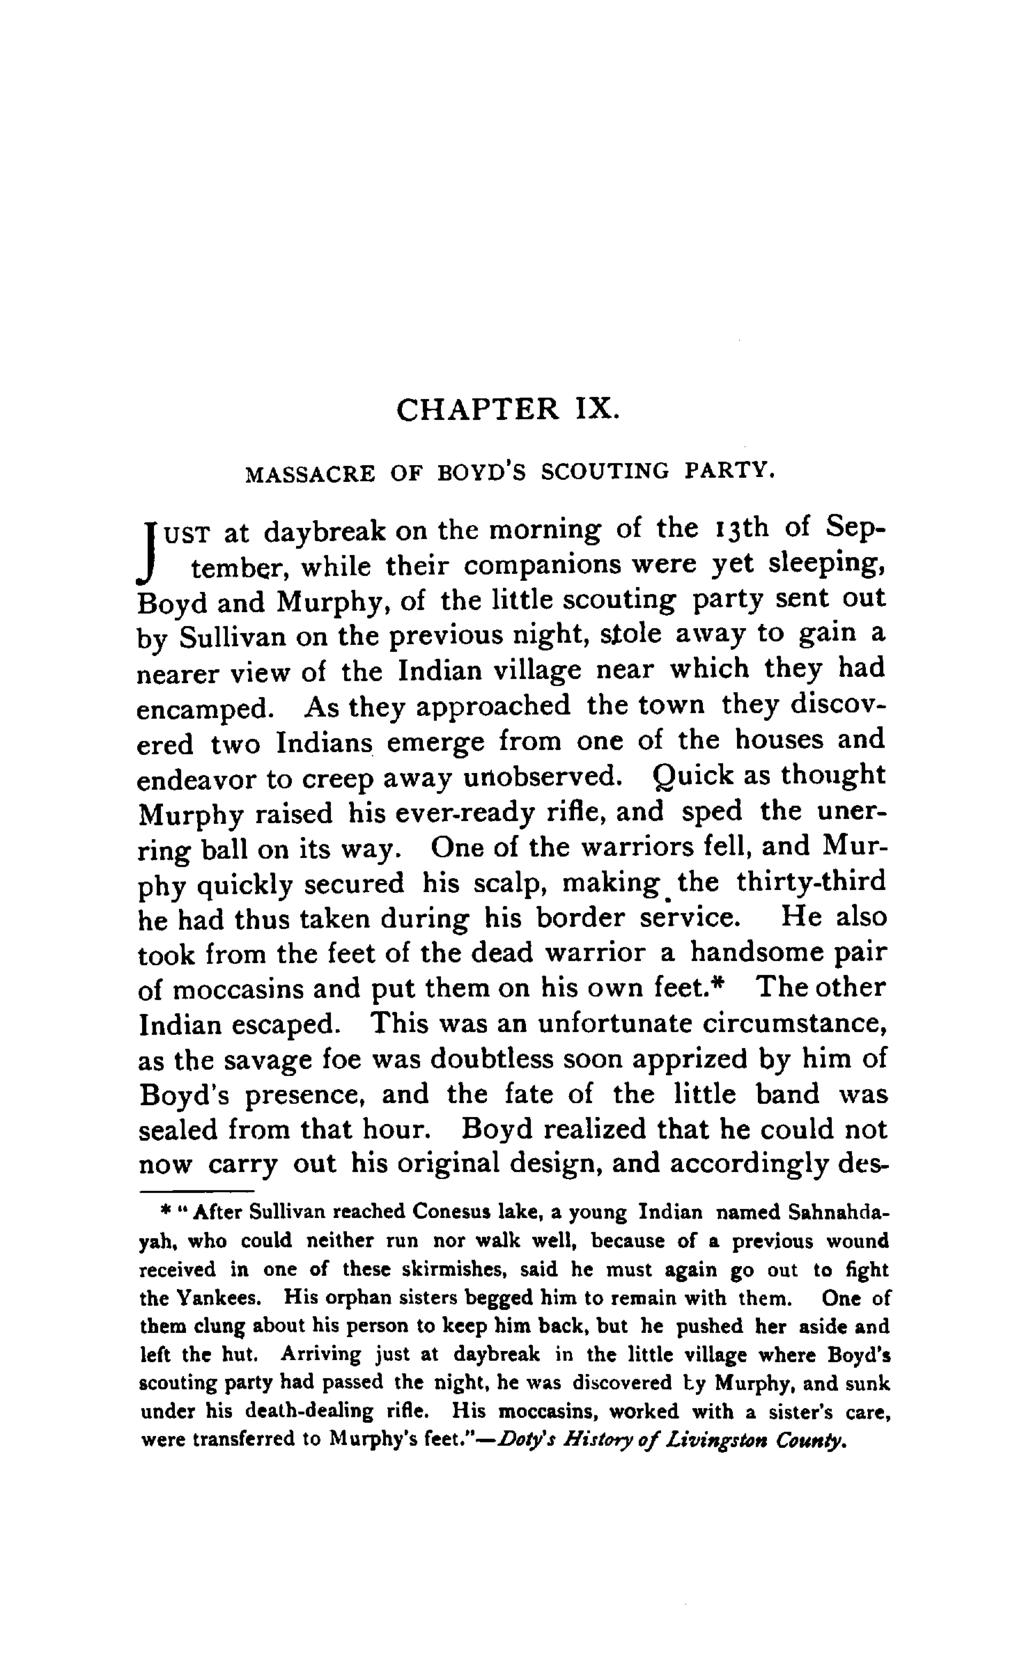 CHAPTER IX. MASSACRE OF BOYD'S SCOUTING PARTY.